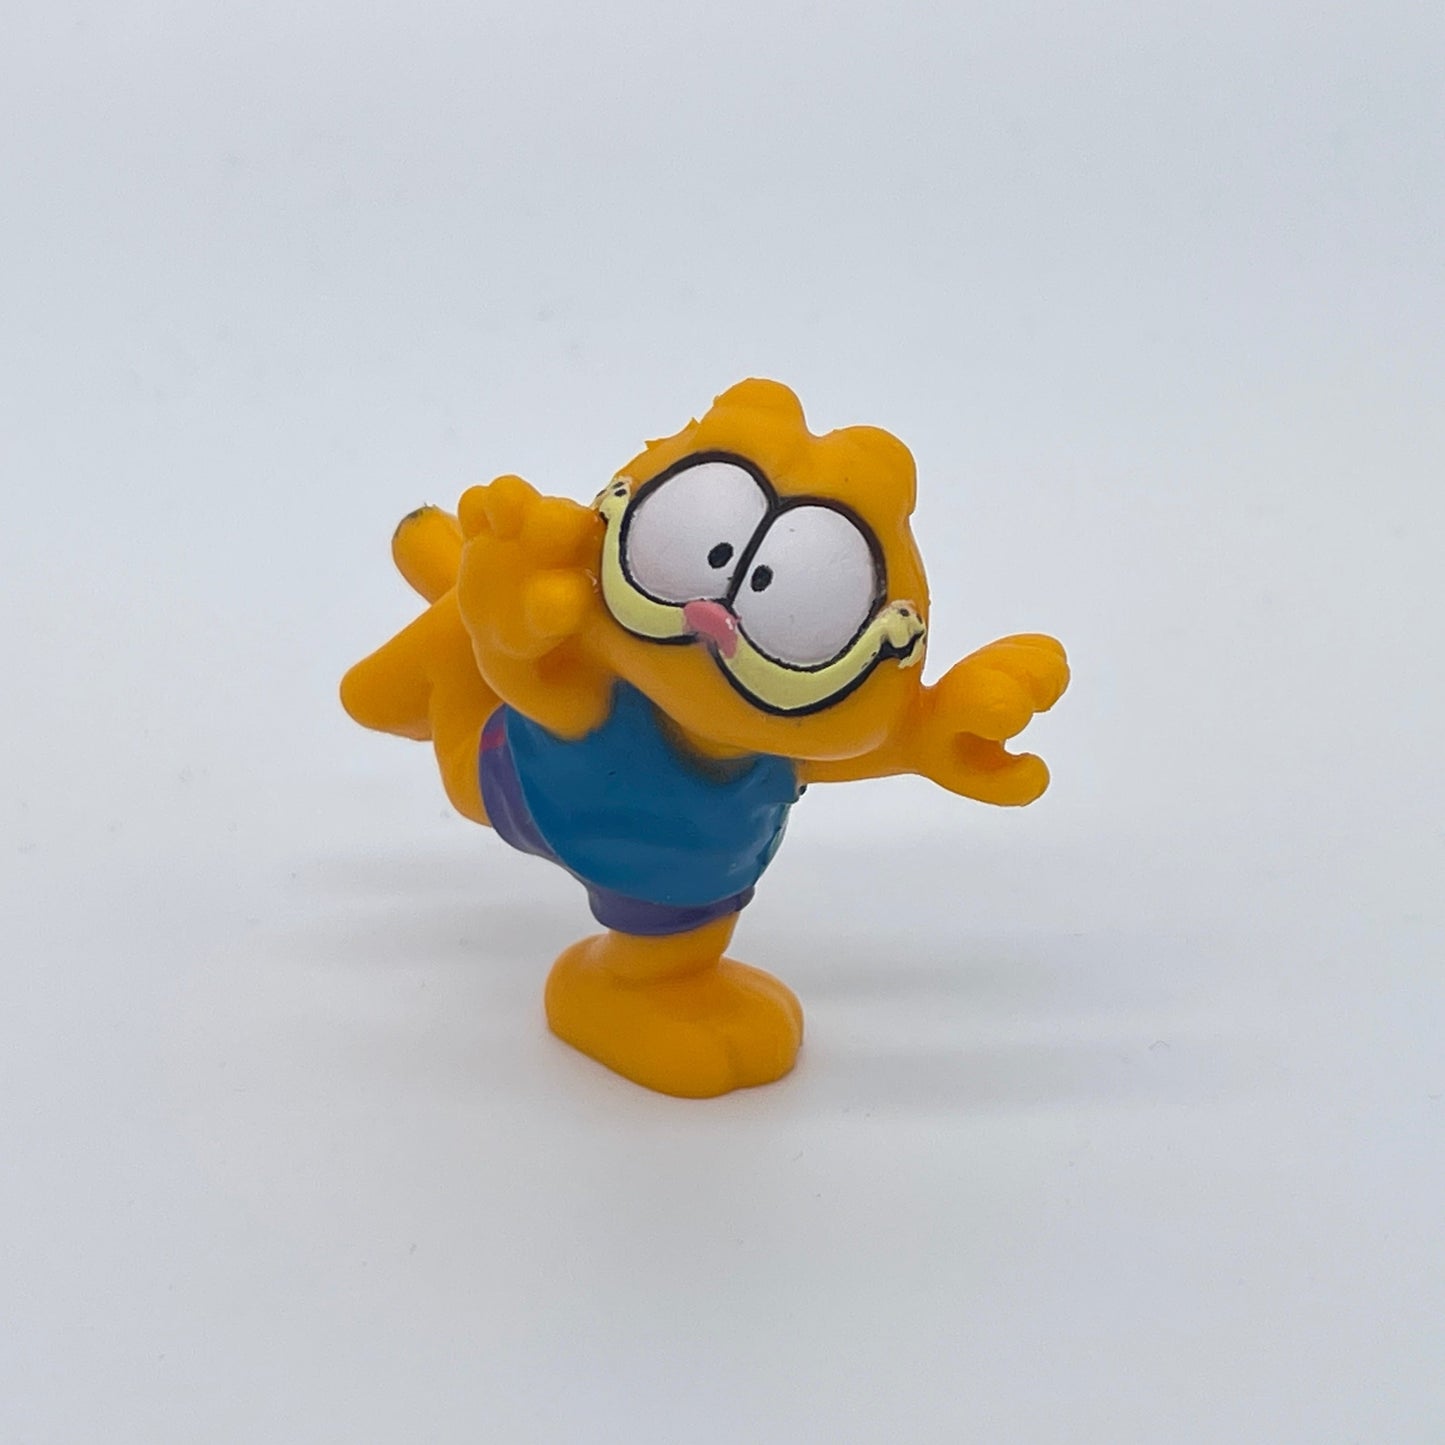 Garfield "Jogger" PVC Figure United Feature Syndicate Vintage (1981) 